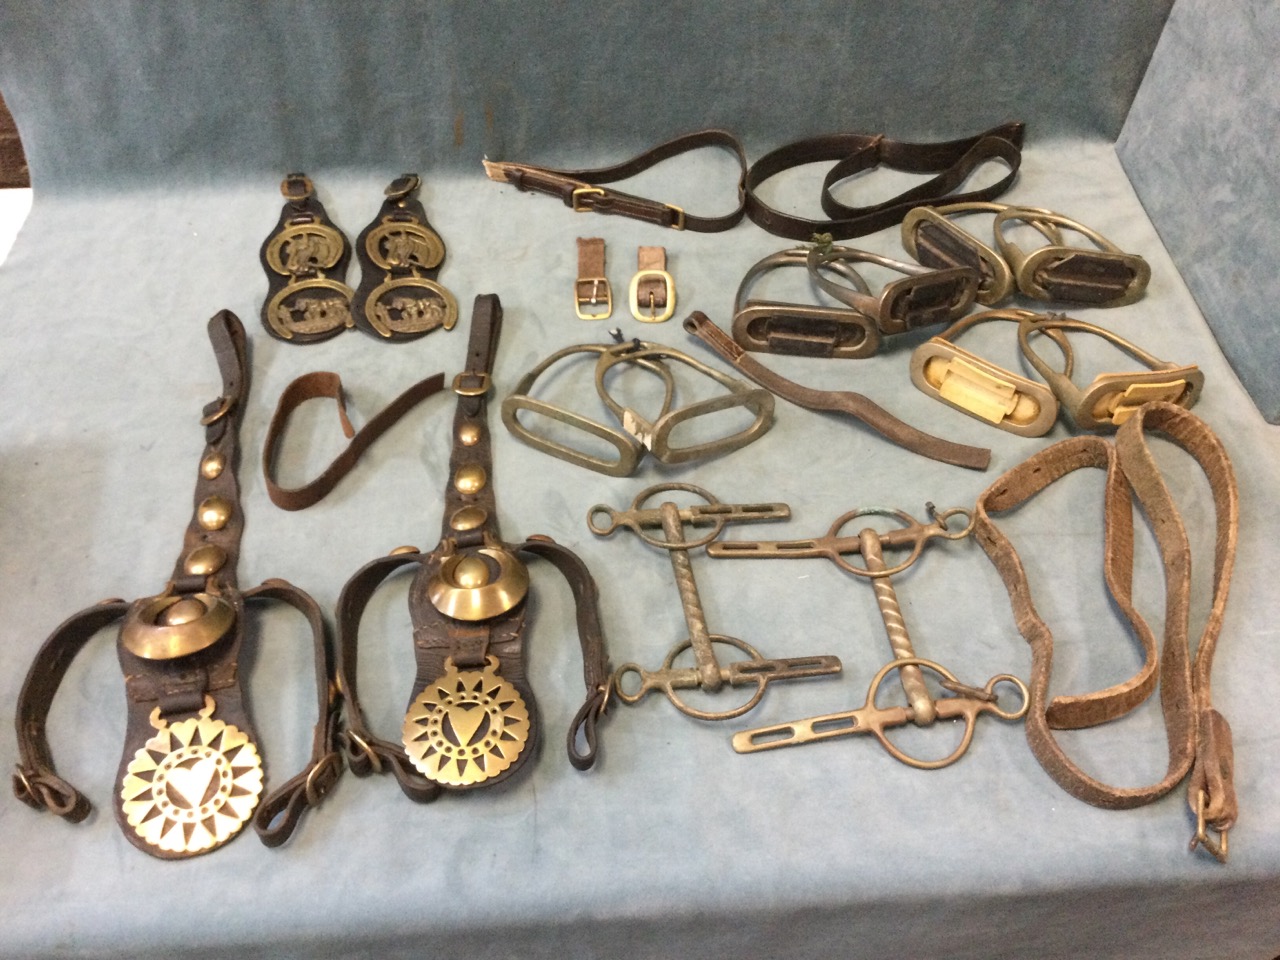 Miscellaneous horse tack - bits, pairs of stirrups - one dated 1914, straps/belts, horse brasses